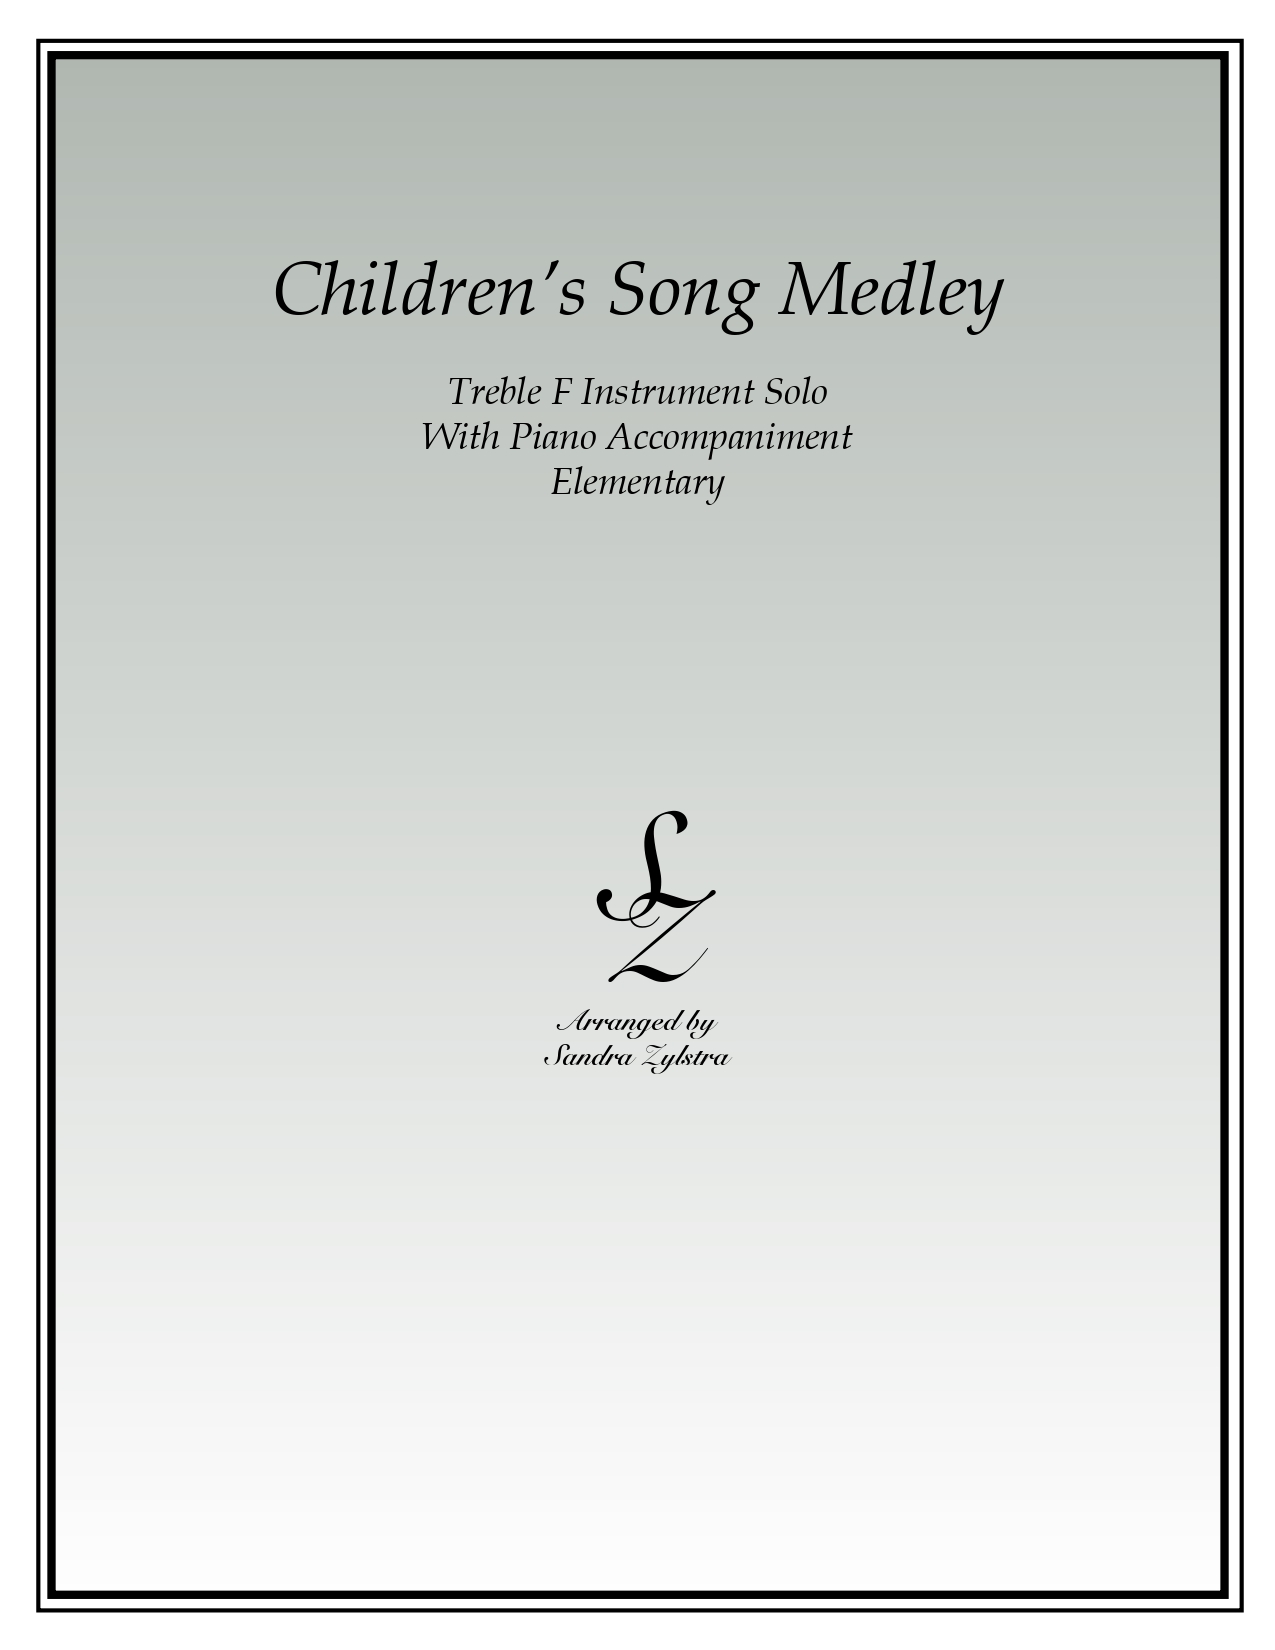 Childrens Song Medley F instrument solo part cover page 00011